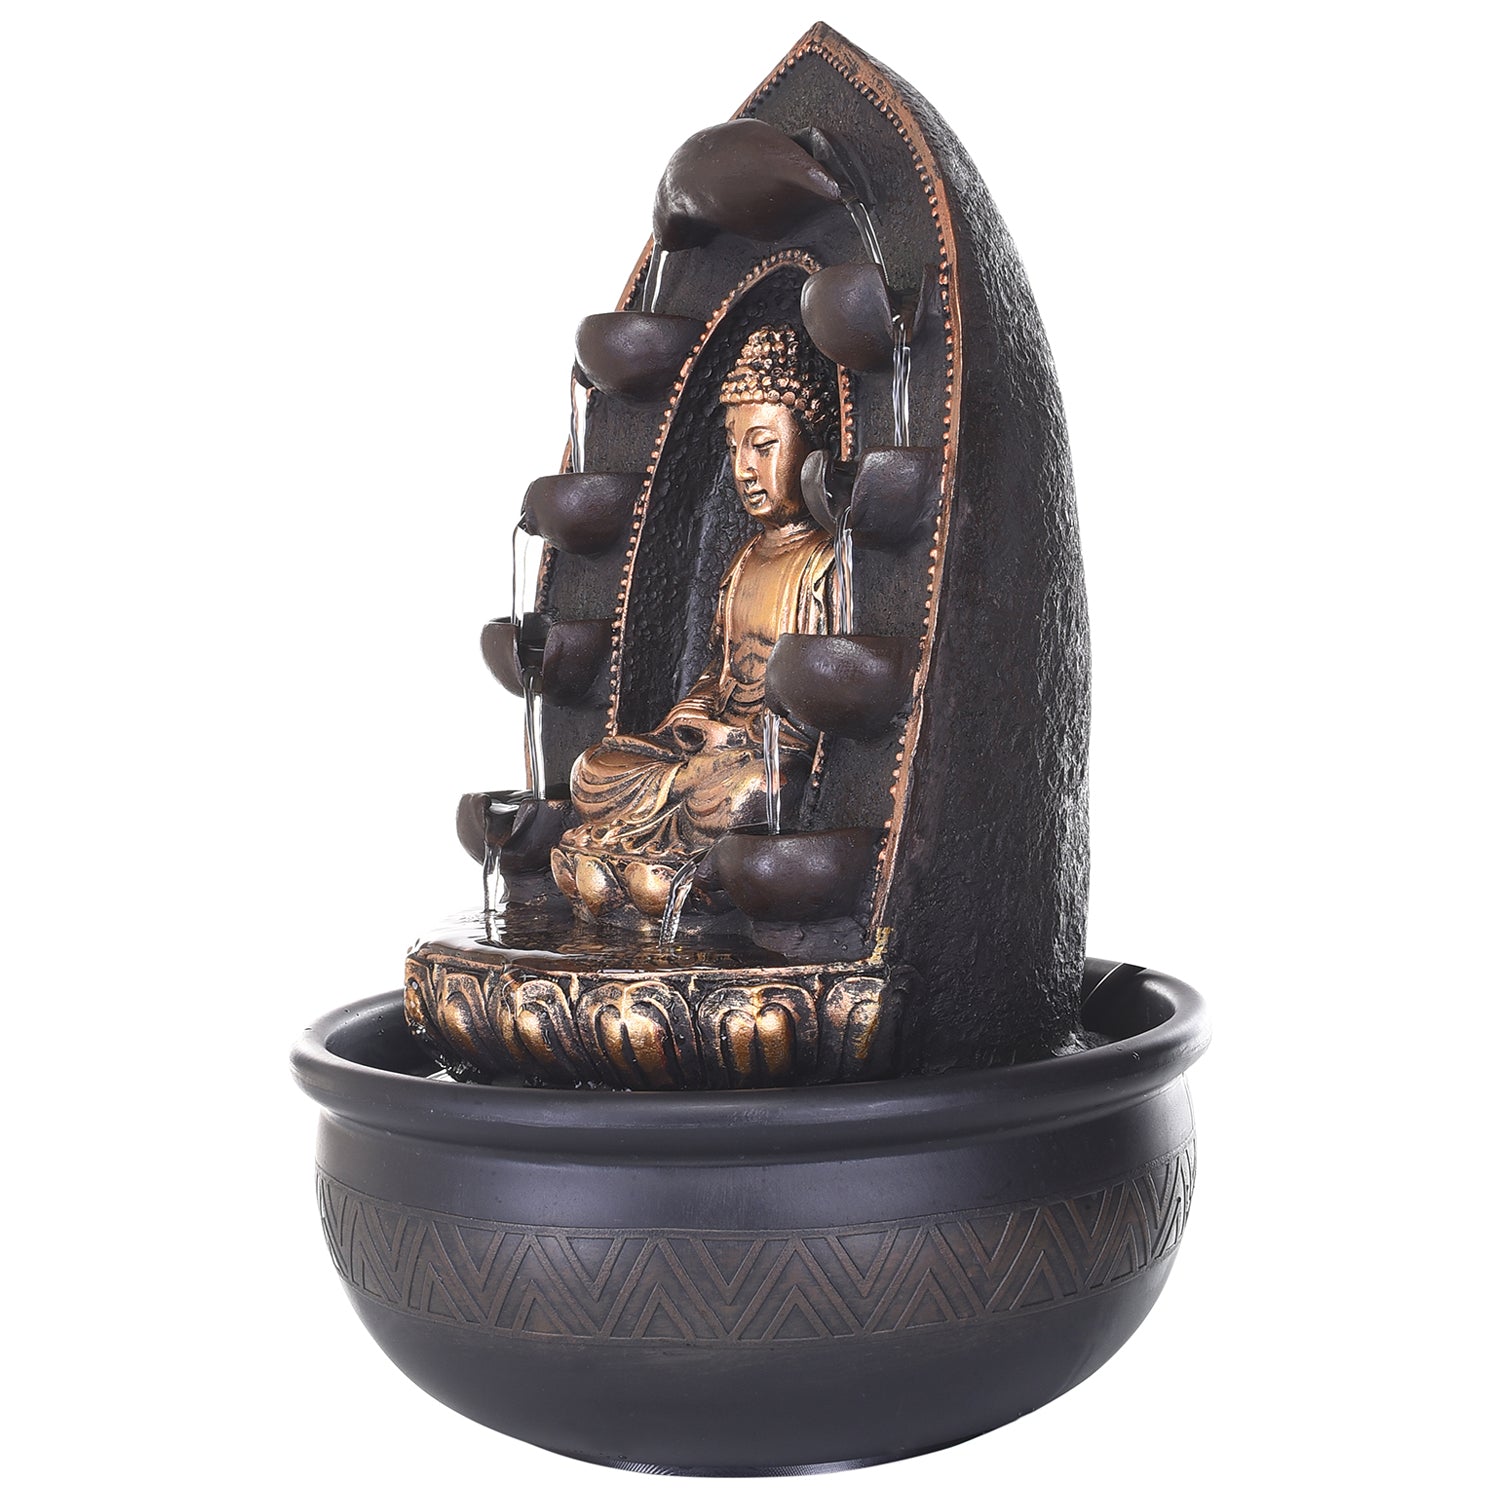 Polystone Brown and Golden Lotus Meditating Buddha Idol Water Fountain With Crystal Ball for Home/Office Decor 2